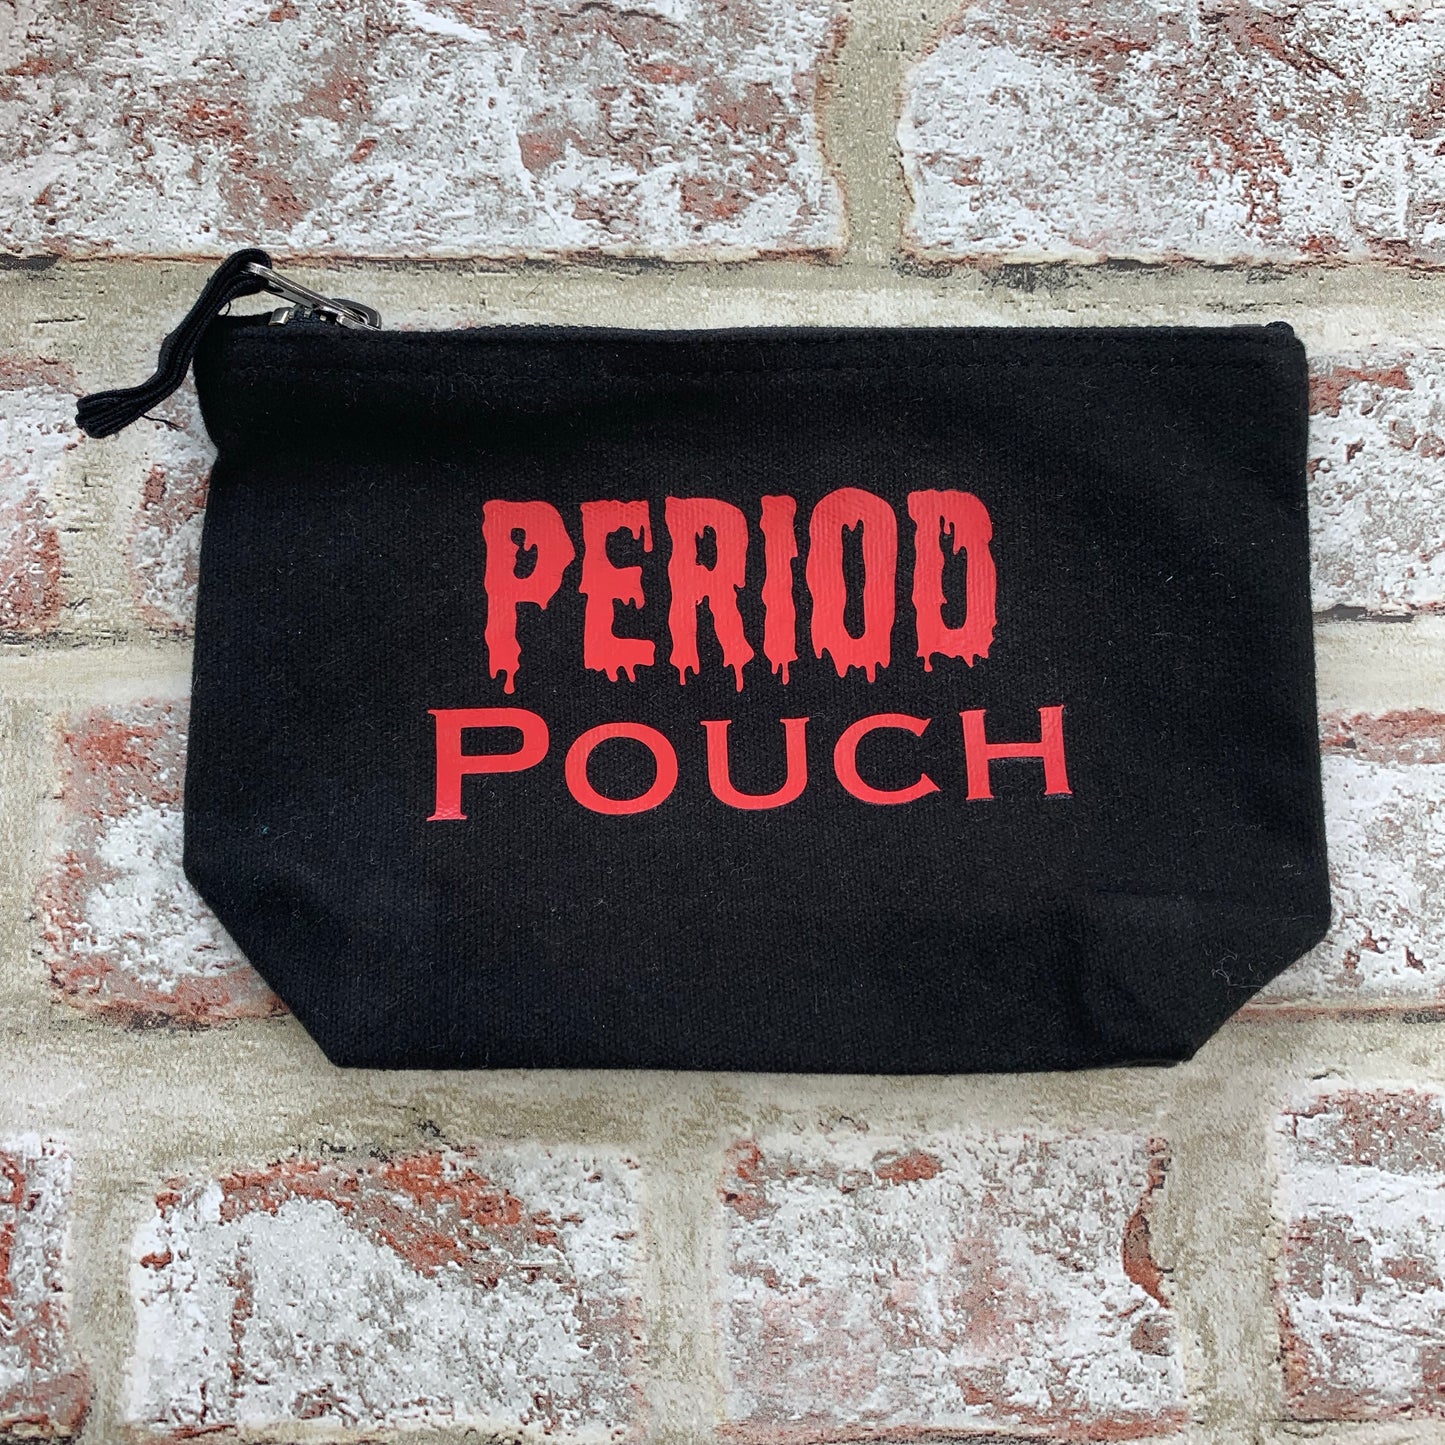 Period Pouch - Tampon, pad, sanitary bag / Period Bag